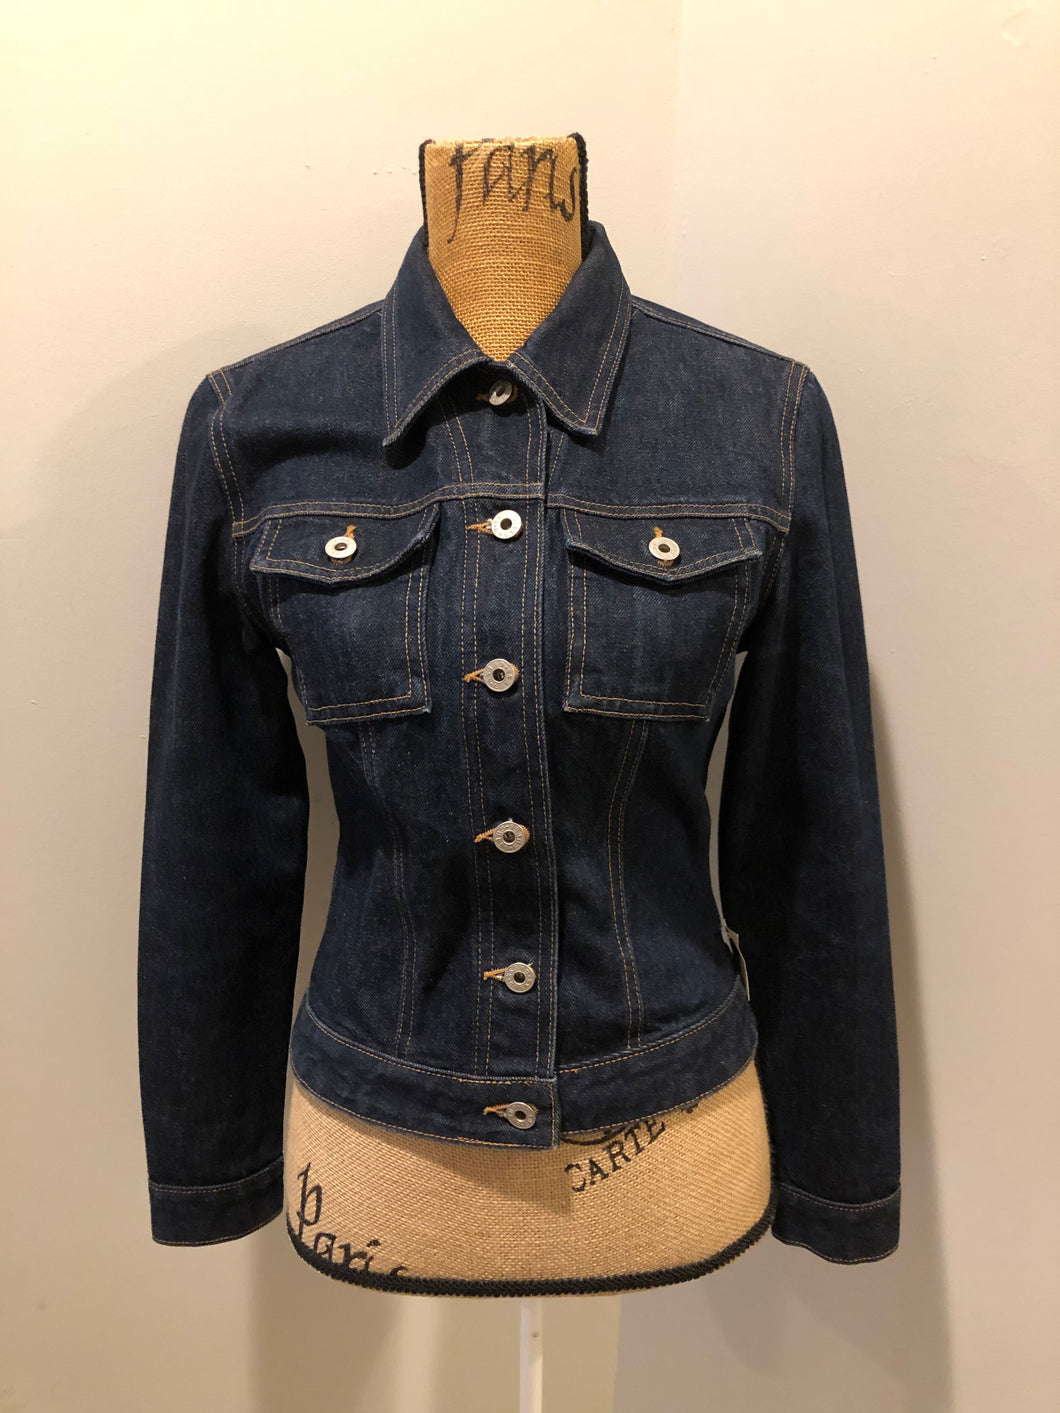 Kingspier Vintage - Guess denim jacket in a dark wash with button closures, two flap pockets on the chest and gold stitching. Size medium